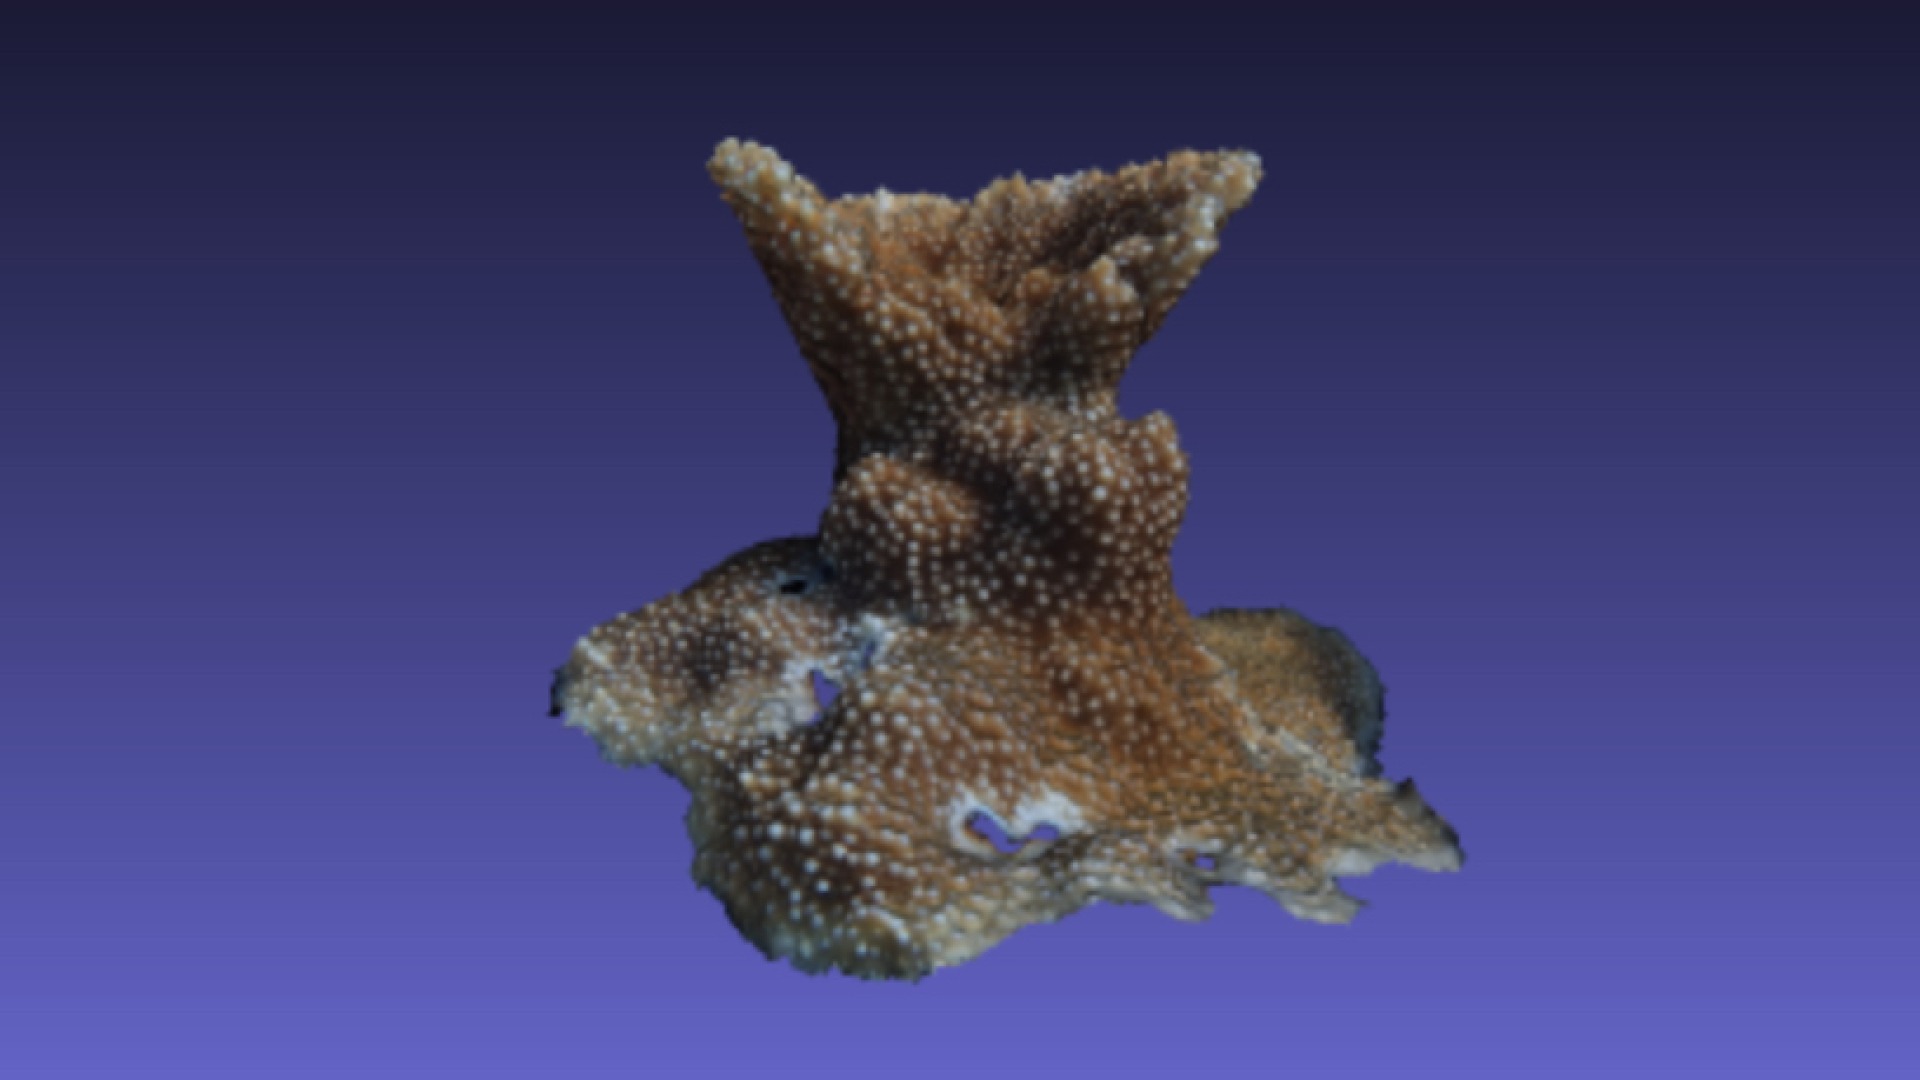 Coral model is cleaned and ready to be measured